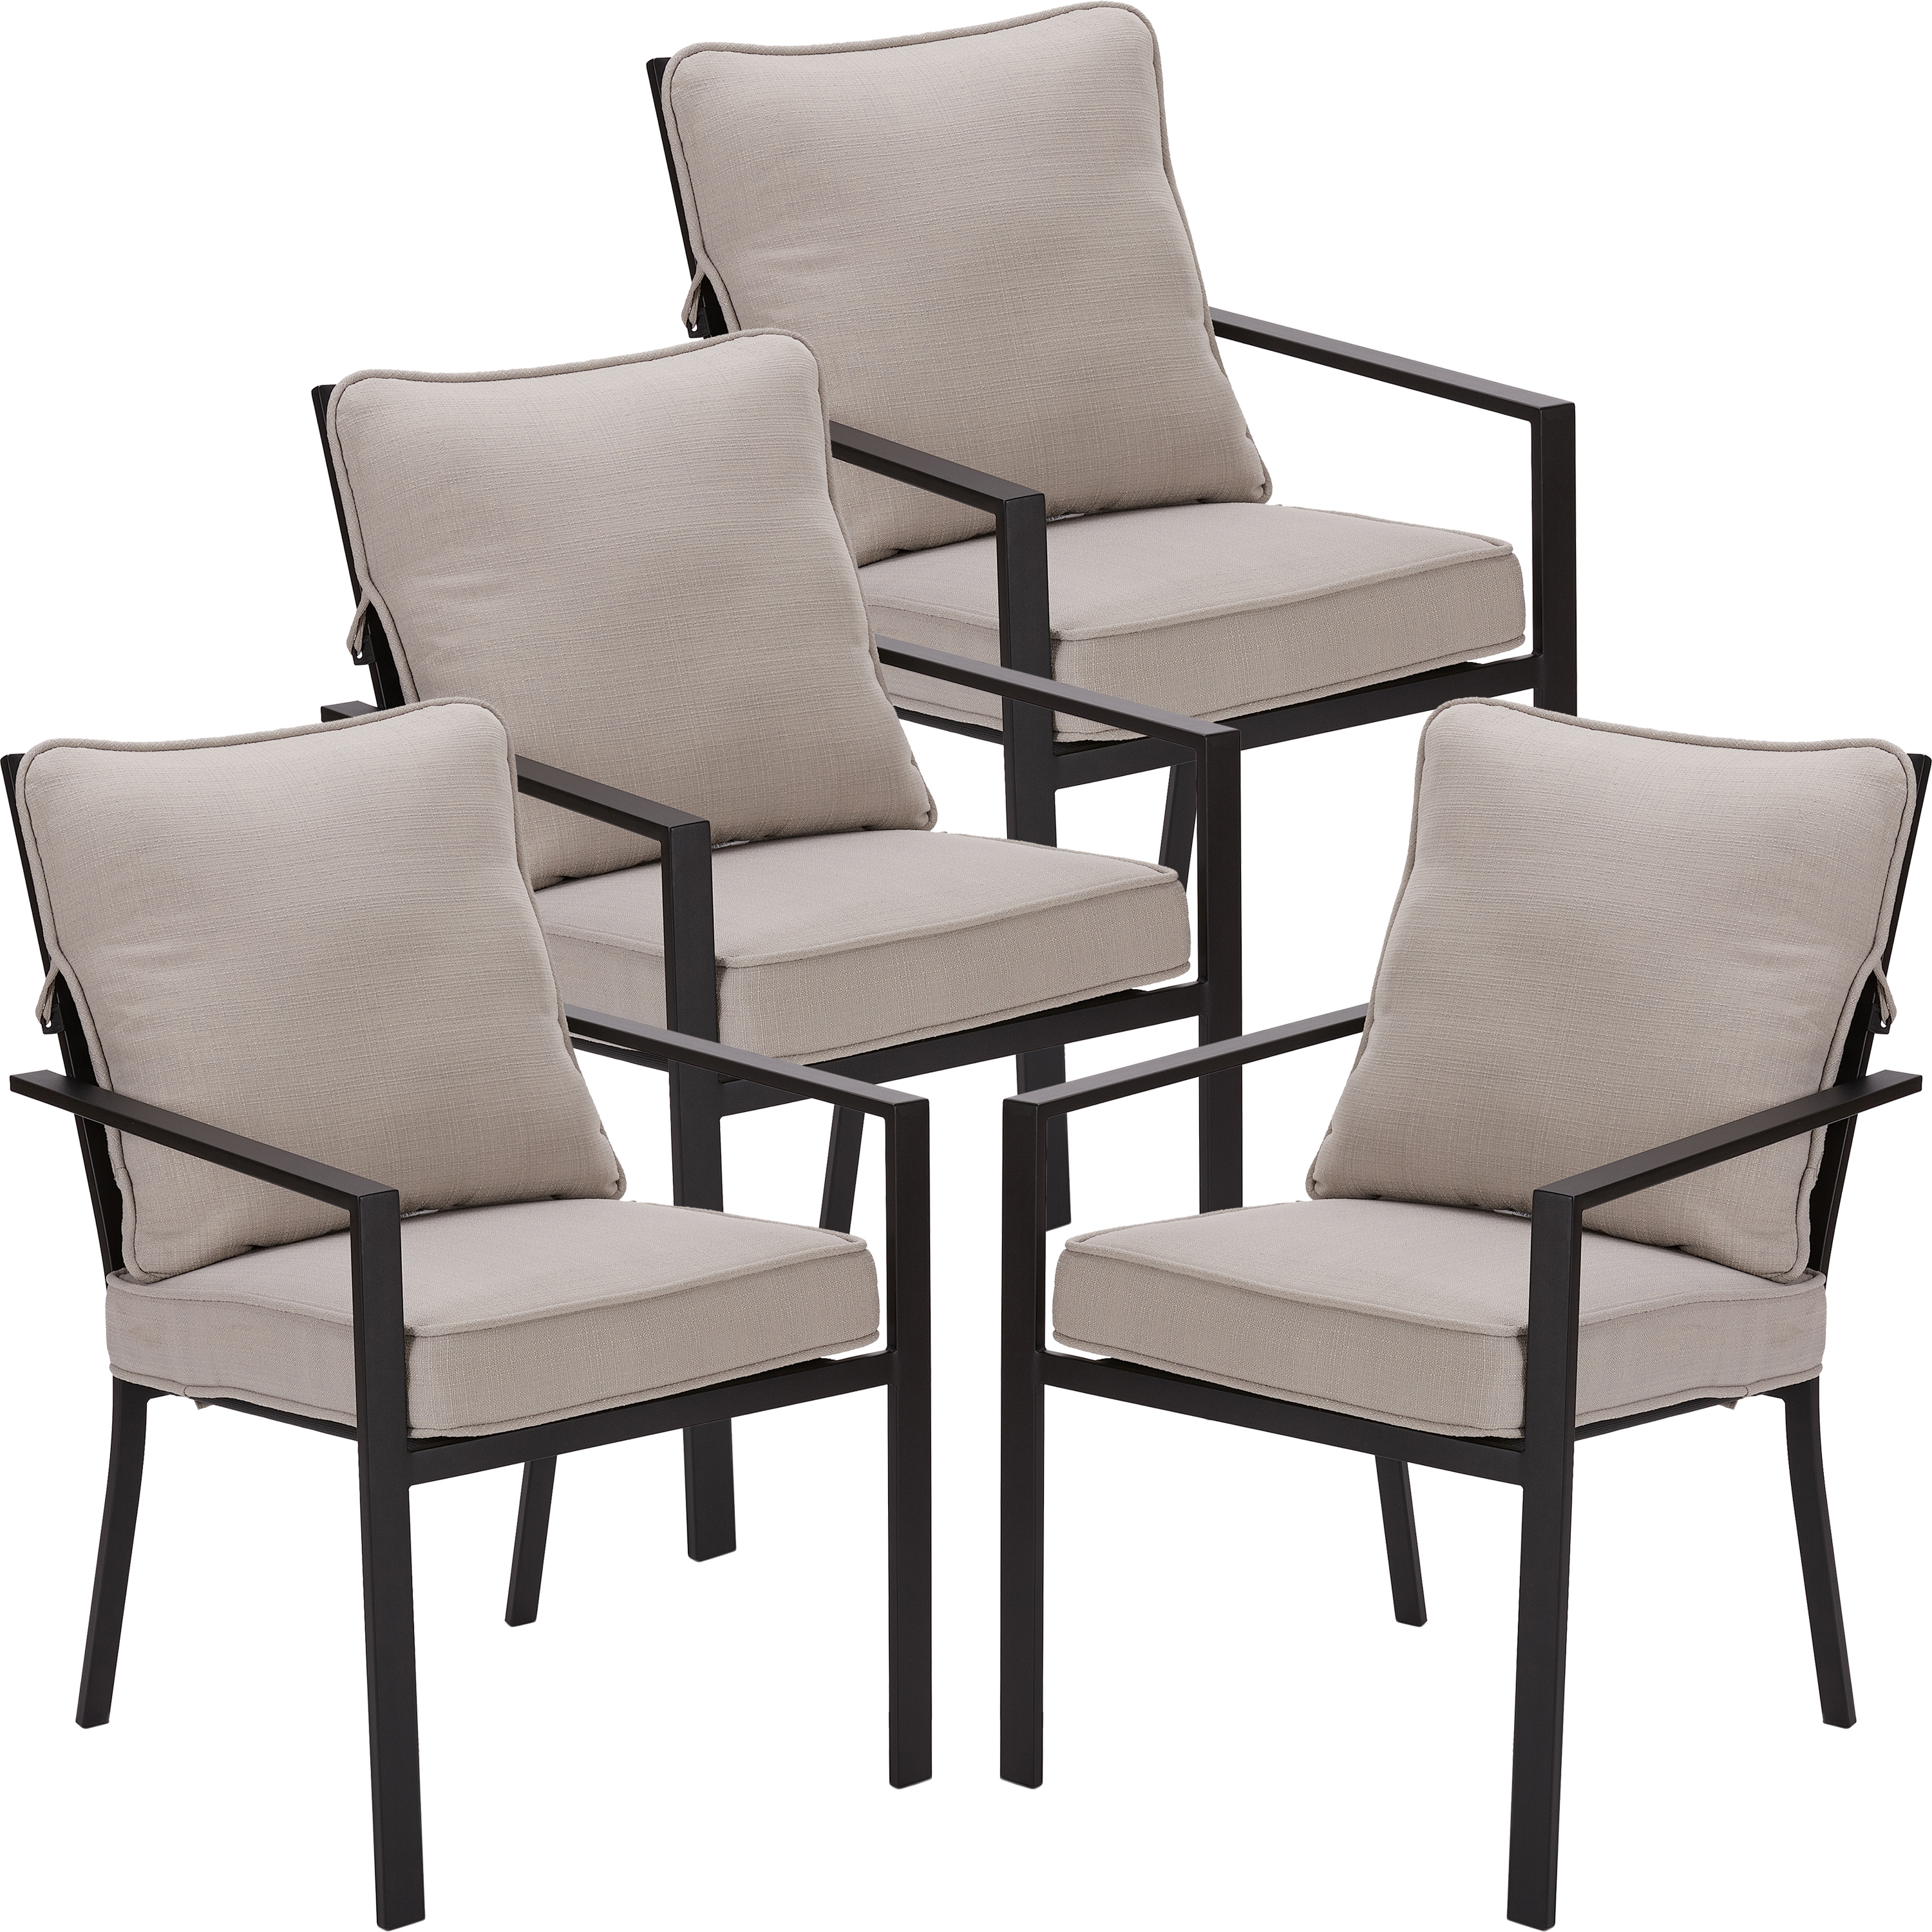 Clearance Patio Sets As Low As 57 At Walmart The Krazy Coupon